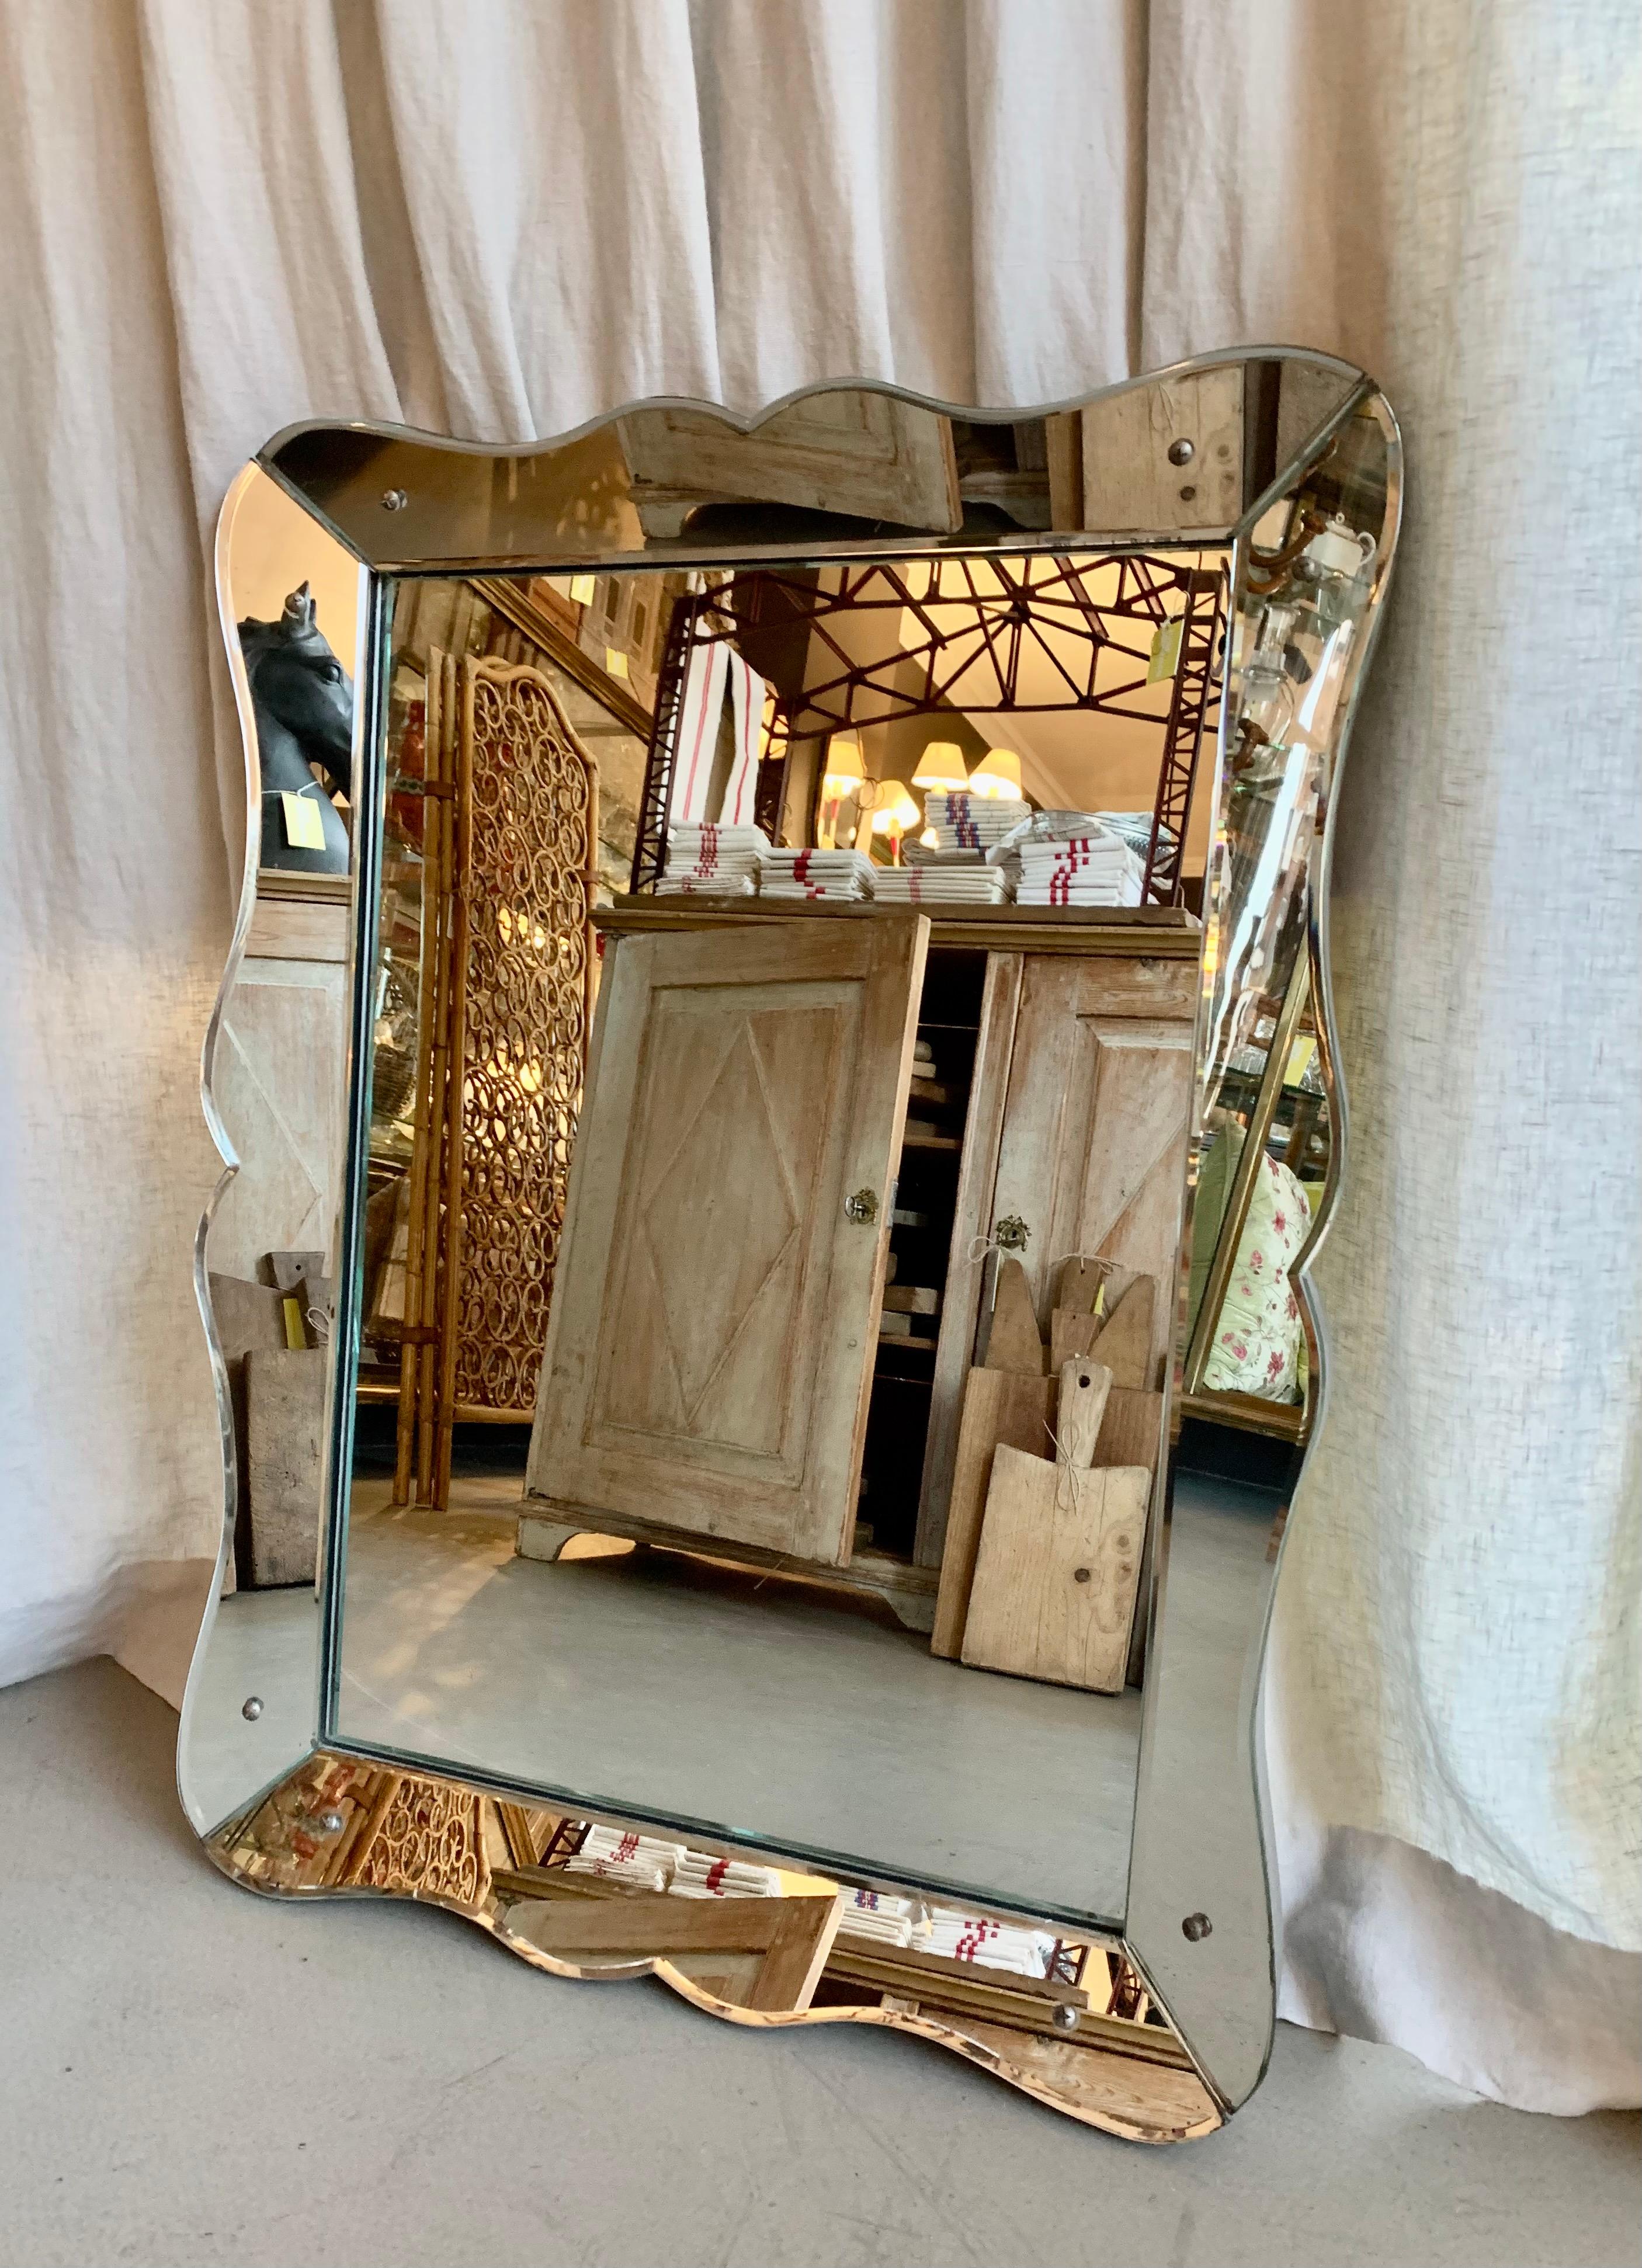 Elegant French vintage mirror with lovely wavy mirror frame - Flamboyant and simple at the same time!